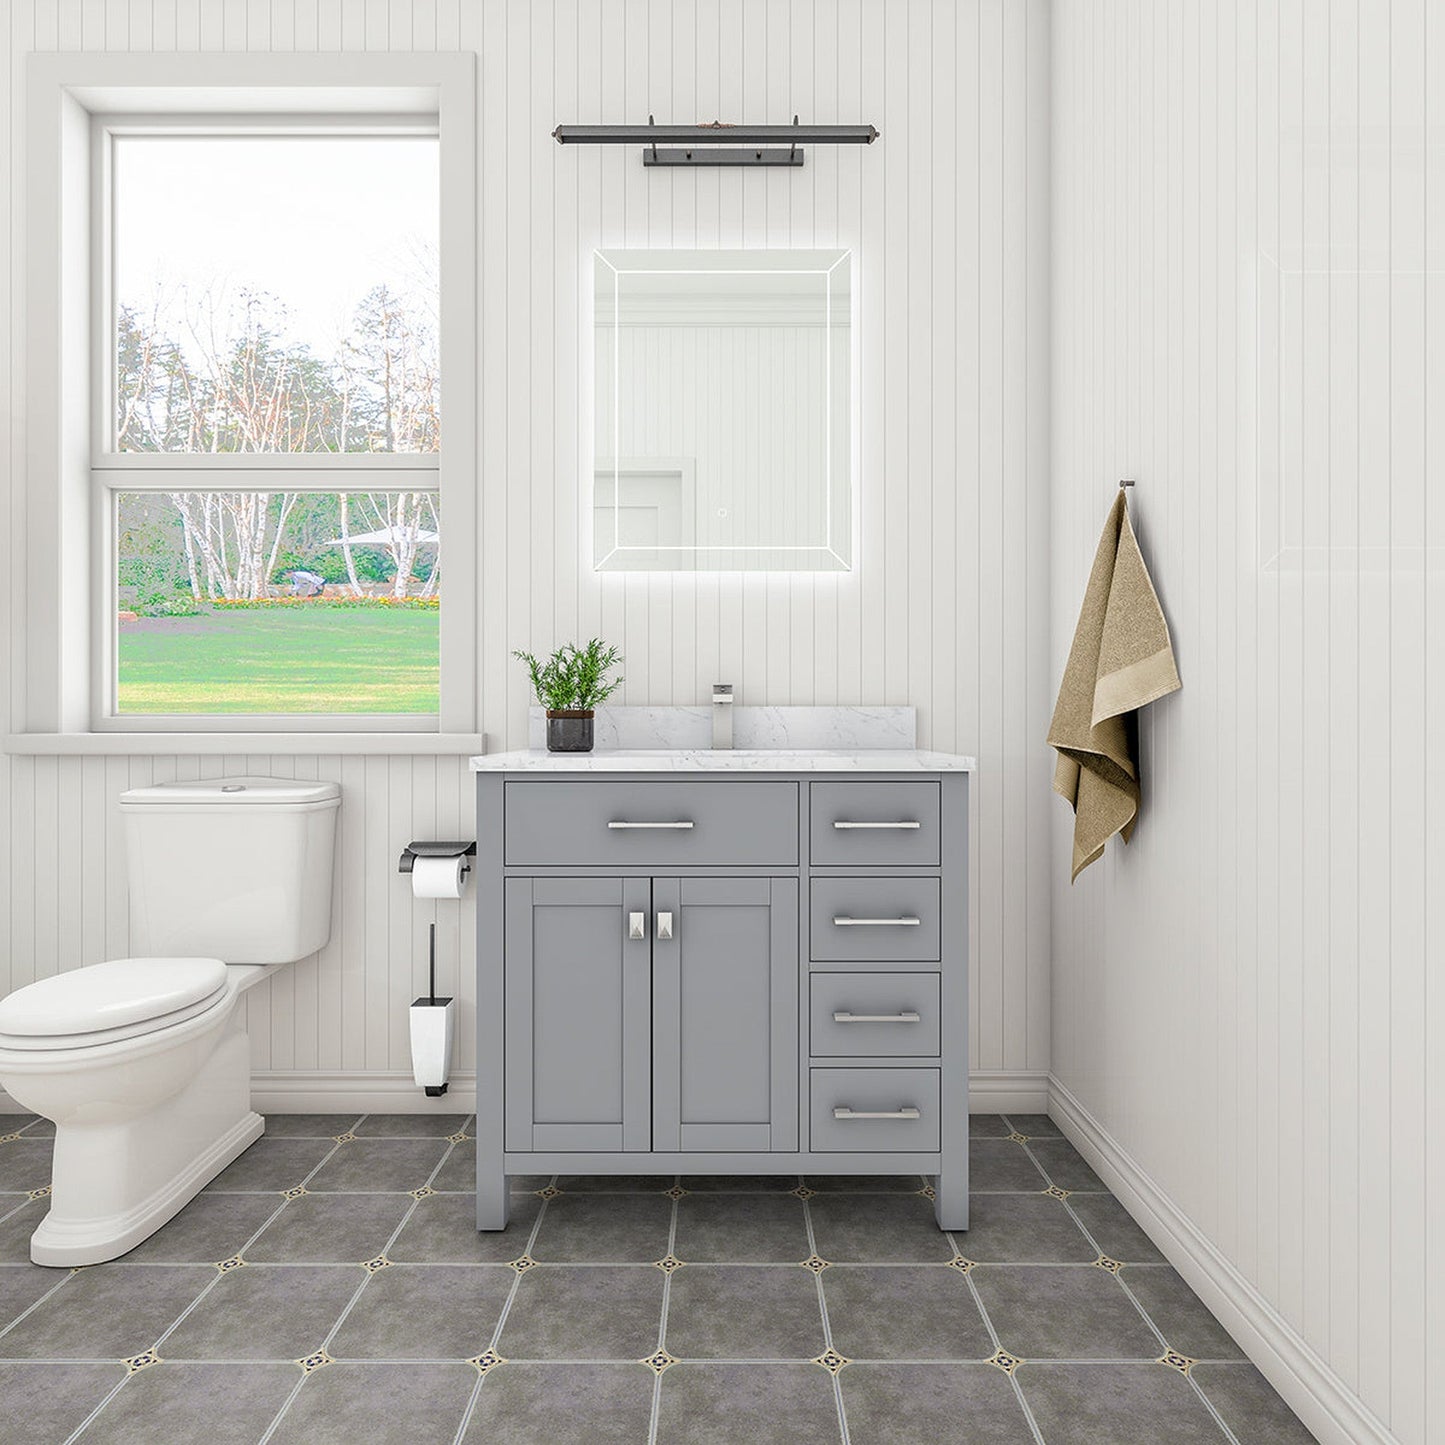 Duko Roma 36" With White Cararra Marble Tabletop, Rectangular Single Basin and Drawer Cabinet Gray Wooden Vanity Set